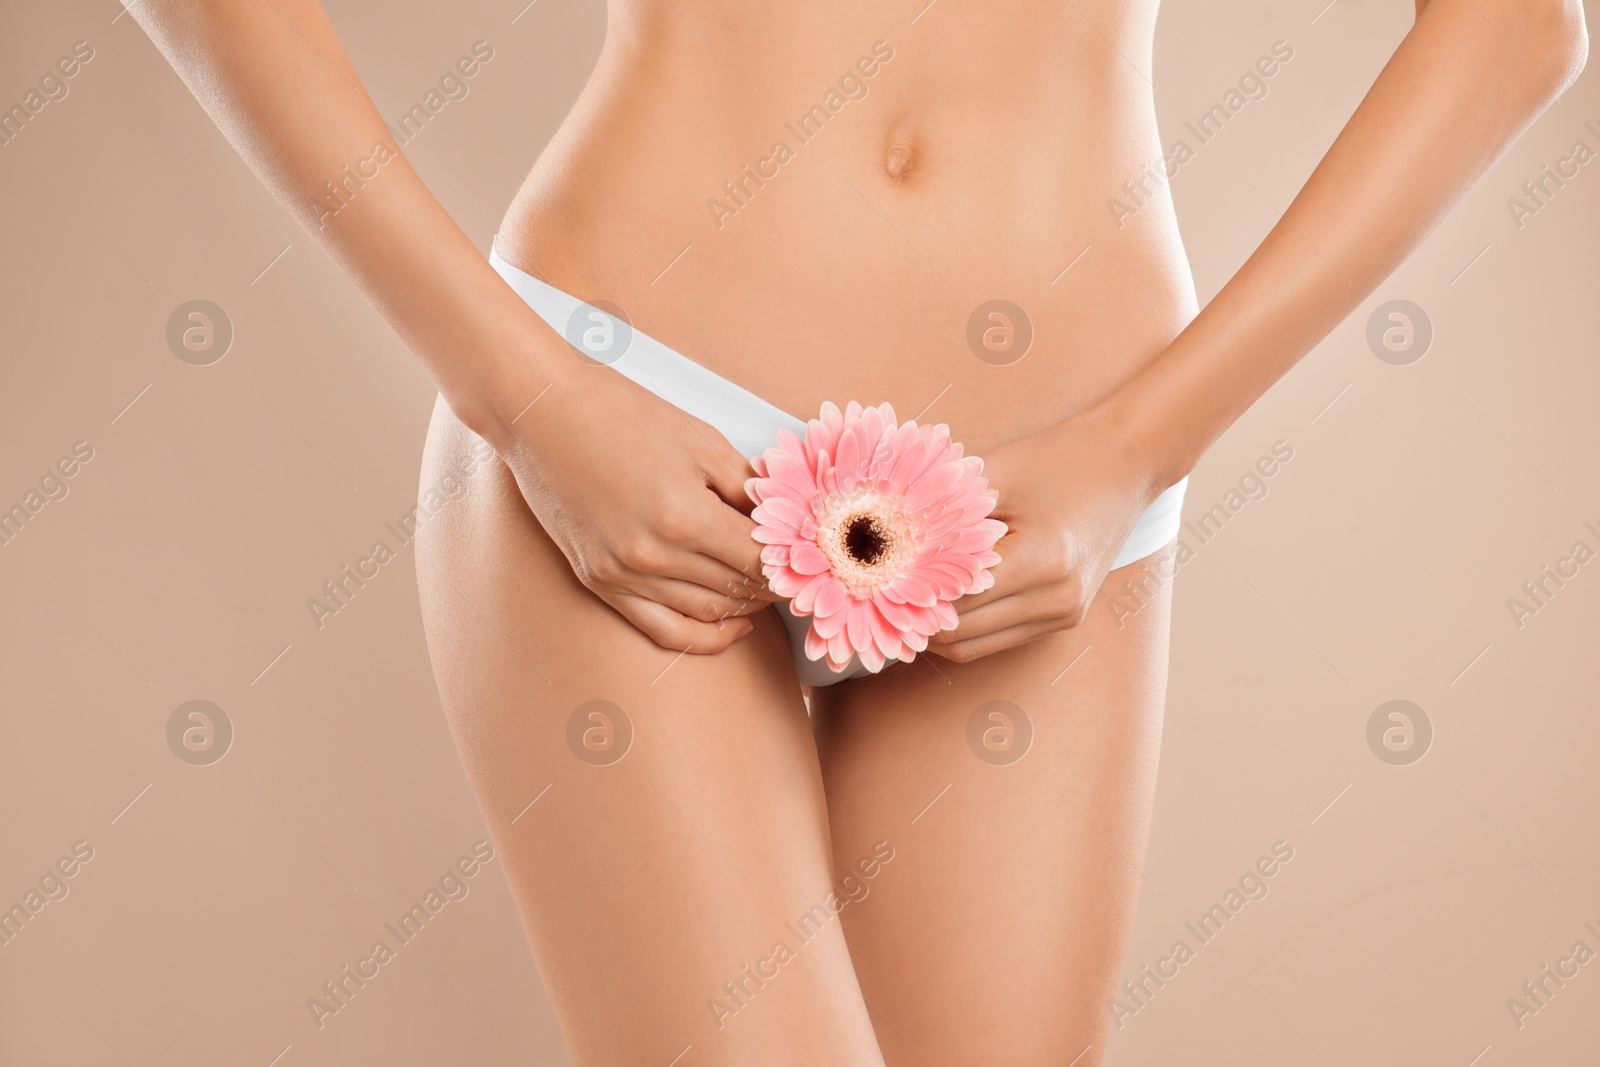 Photo of Woman with flower showing smooth skin after bikini epilation on beige background, closeup. Body care concept